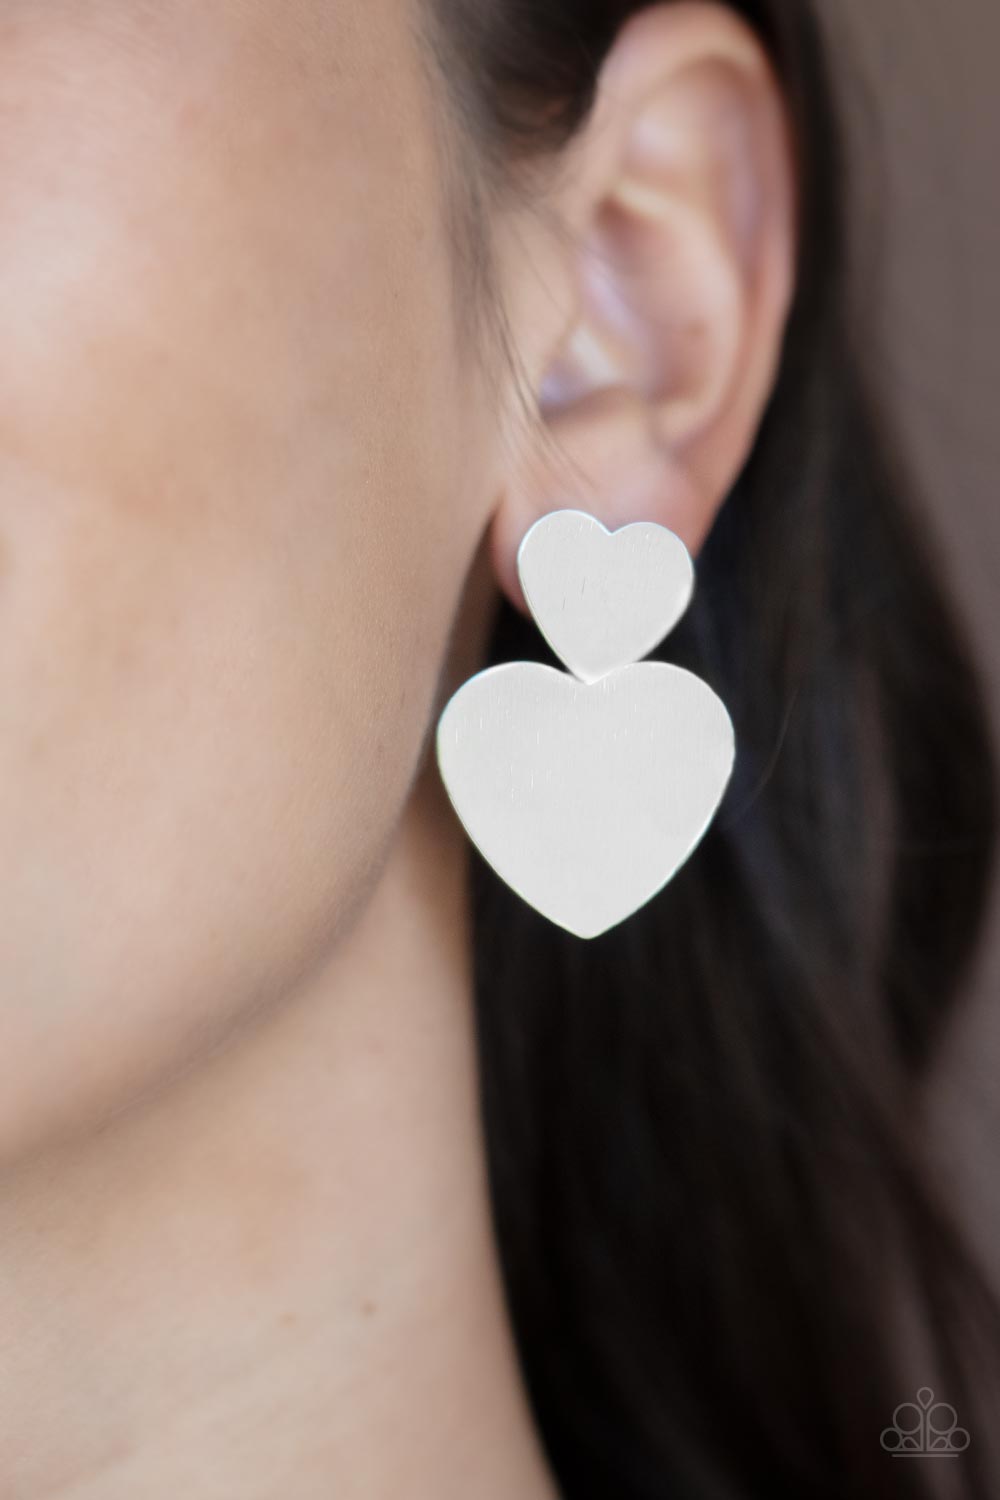 Paparazzi Accessories - Heart-Racing Refinement #E66 - Silver Earrings